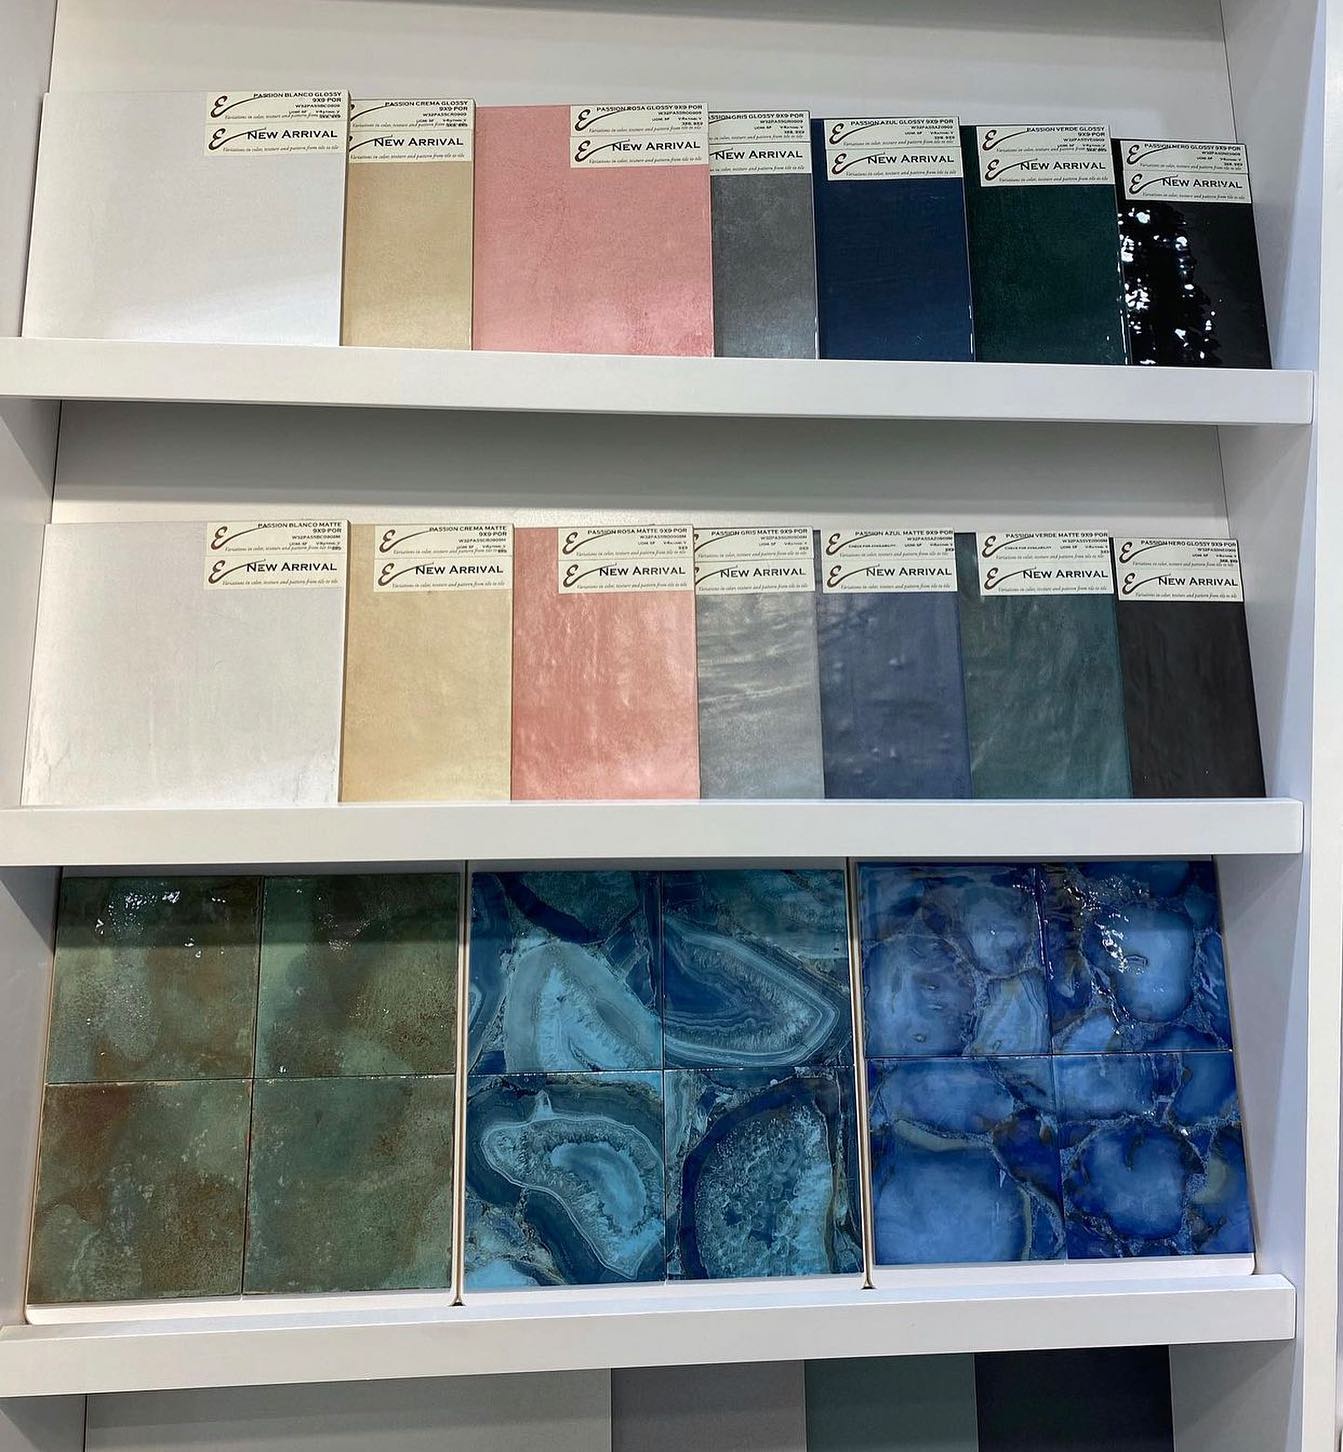 2021’s tile selection will be tough to beat! This year we’ve been honored to introduce countless collections ranging in a variety of colors, sizes, textures, and patterns. 2022, we’re ready to continue bringing you the best tile and natural stone in the biz!  #emsertile #2022goals